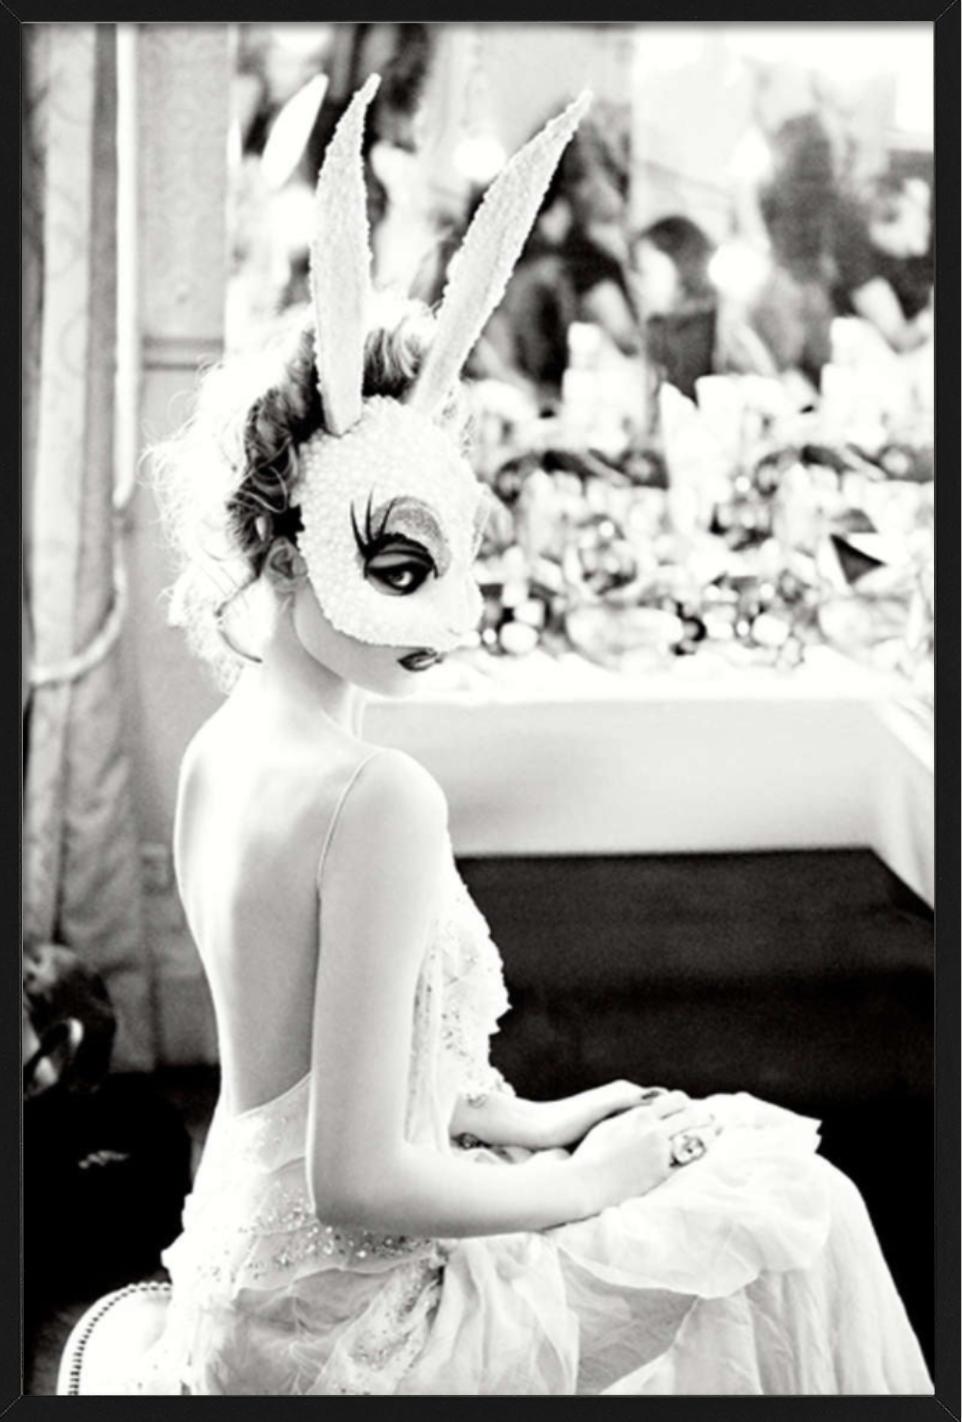 White Bunny - Model with crystalised bunny Mask, b&w fine art photography, 2012 For Sale 3